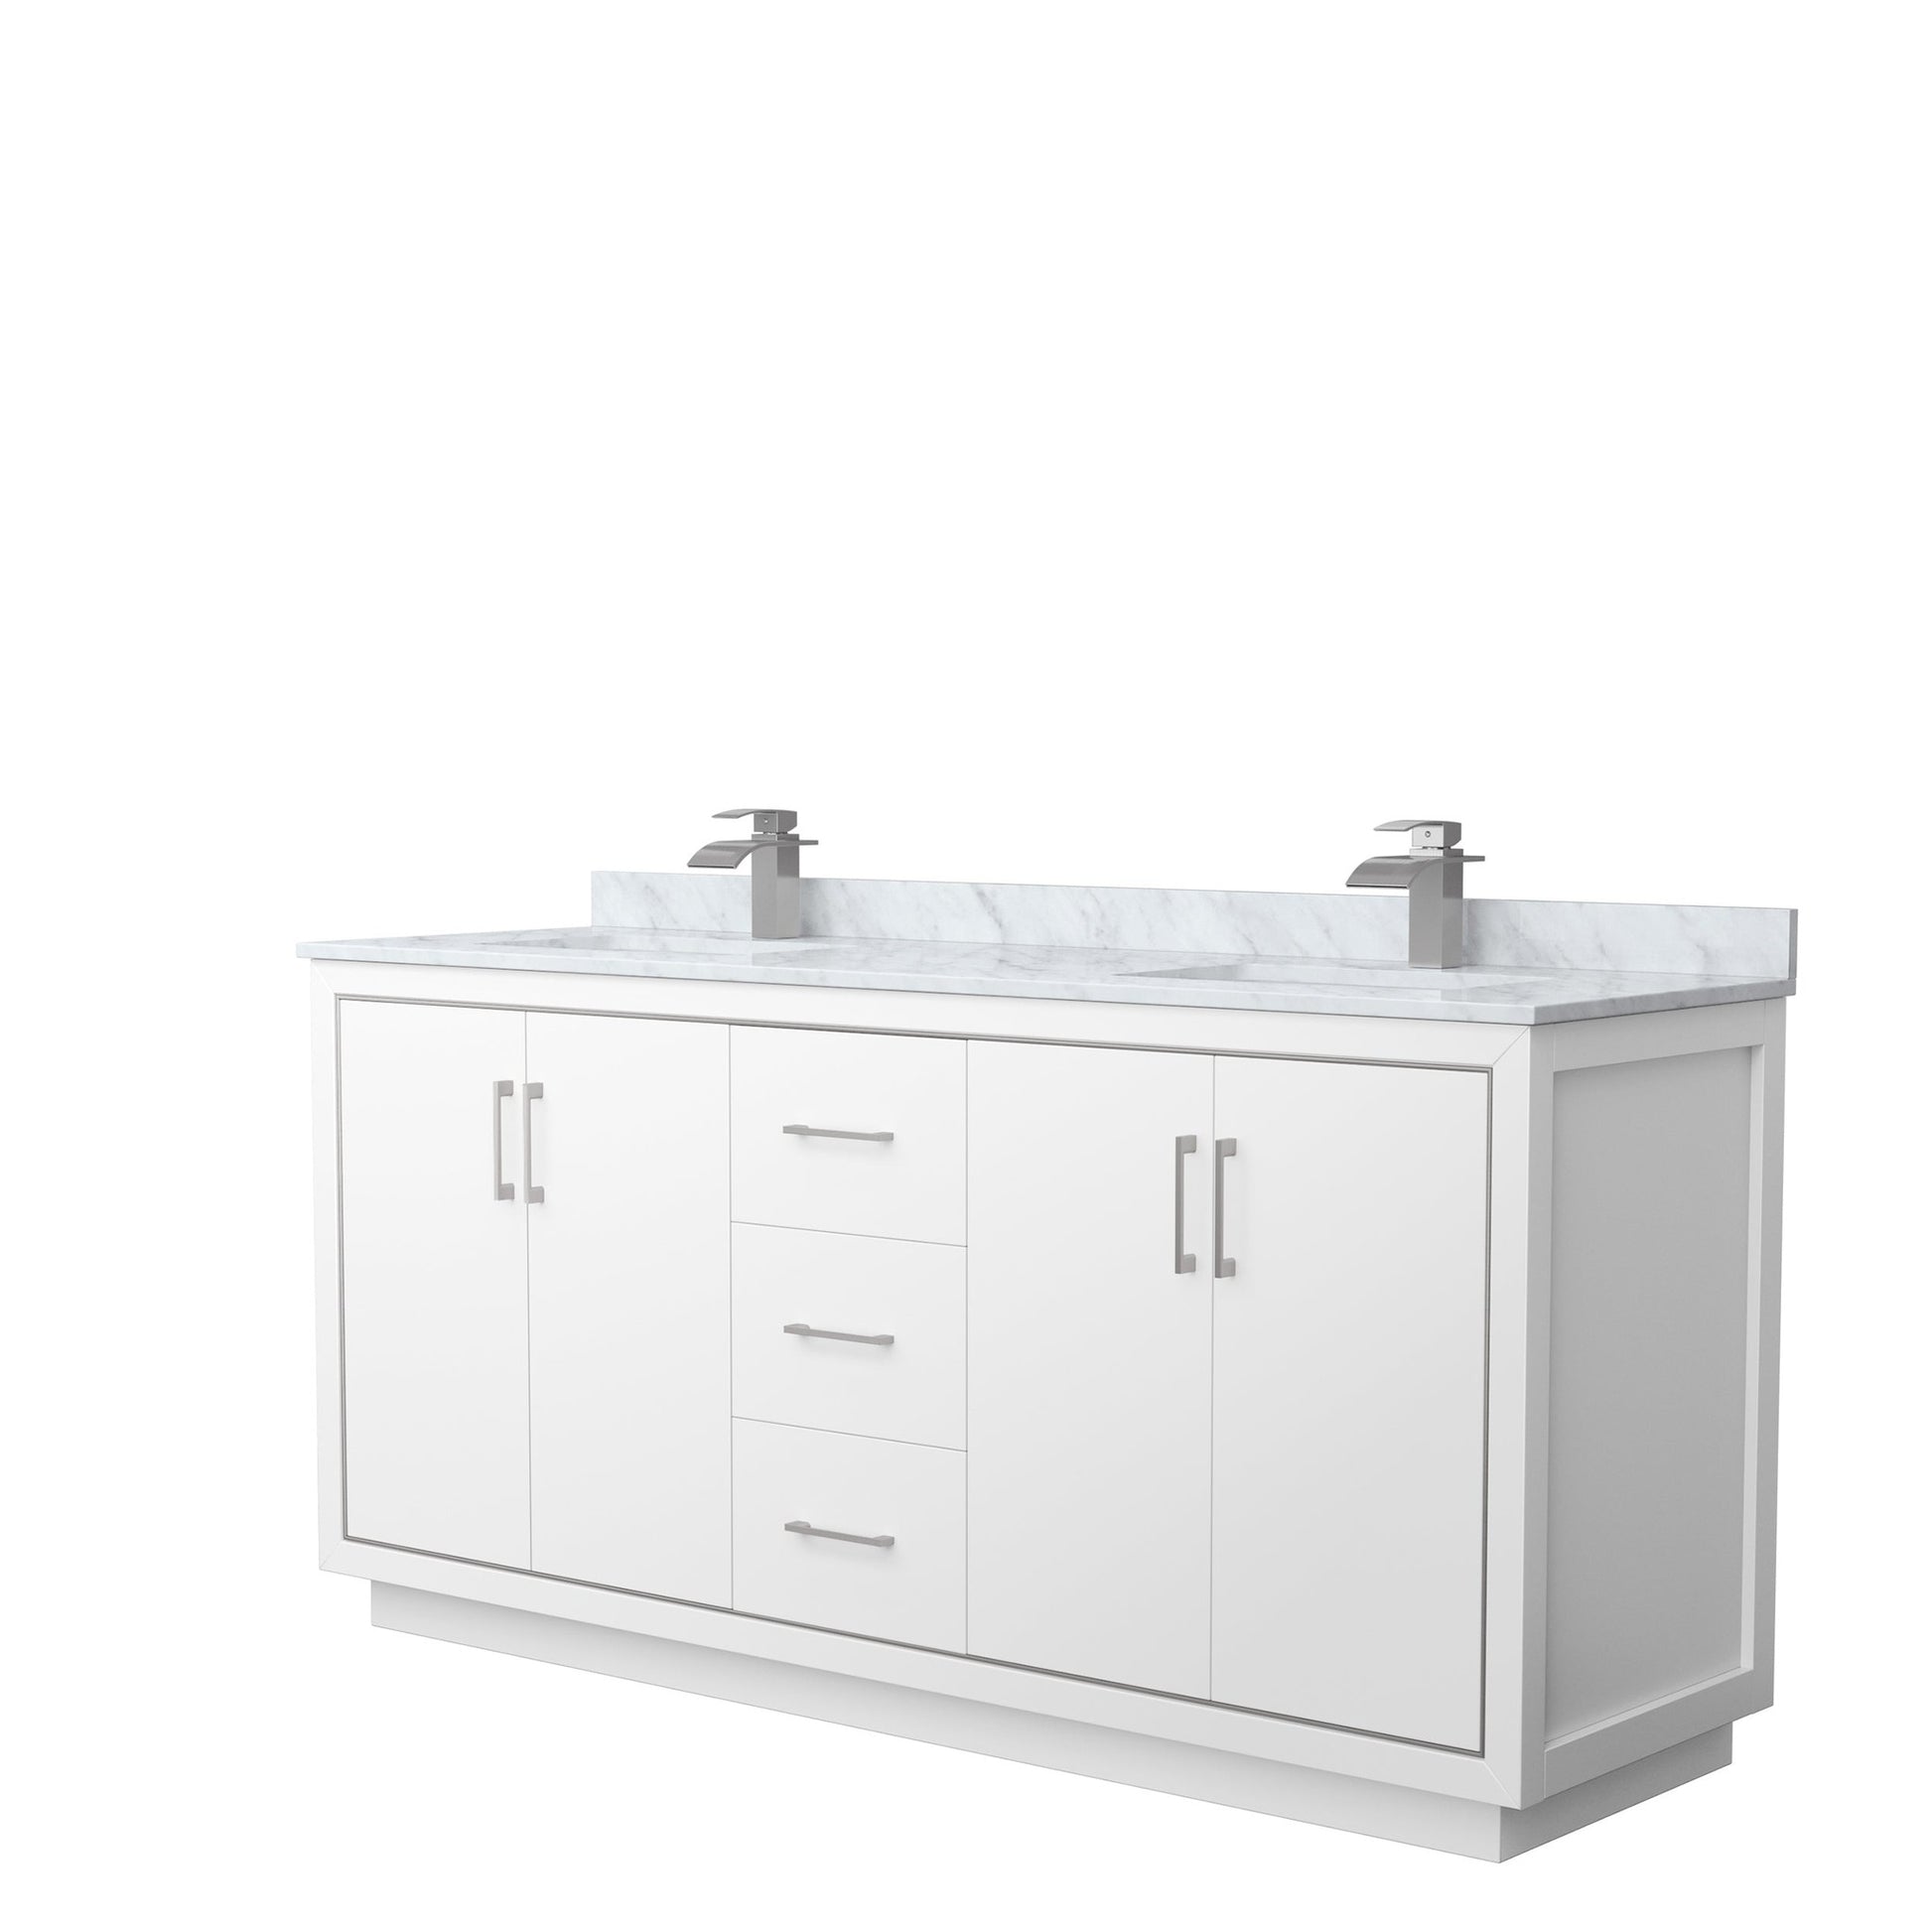 Wyndham Collection Icon 72" Double Bathroom Vanity in White, White Carrara Marble Countertop, Undermount Square Sinks, Brushed Nickel Trim